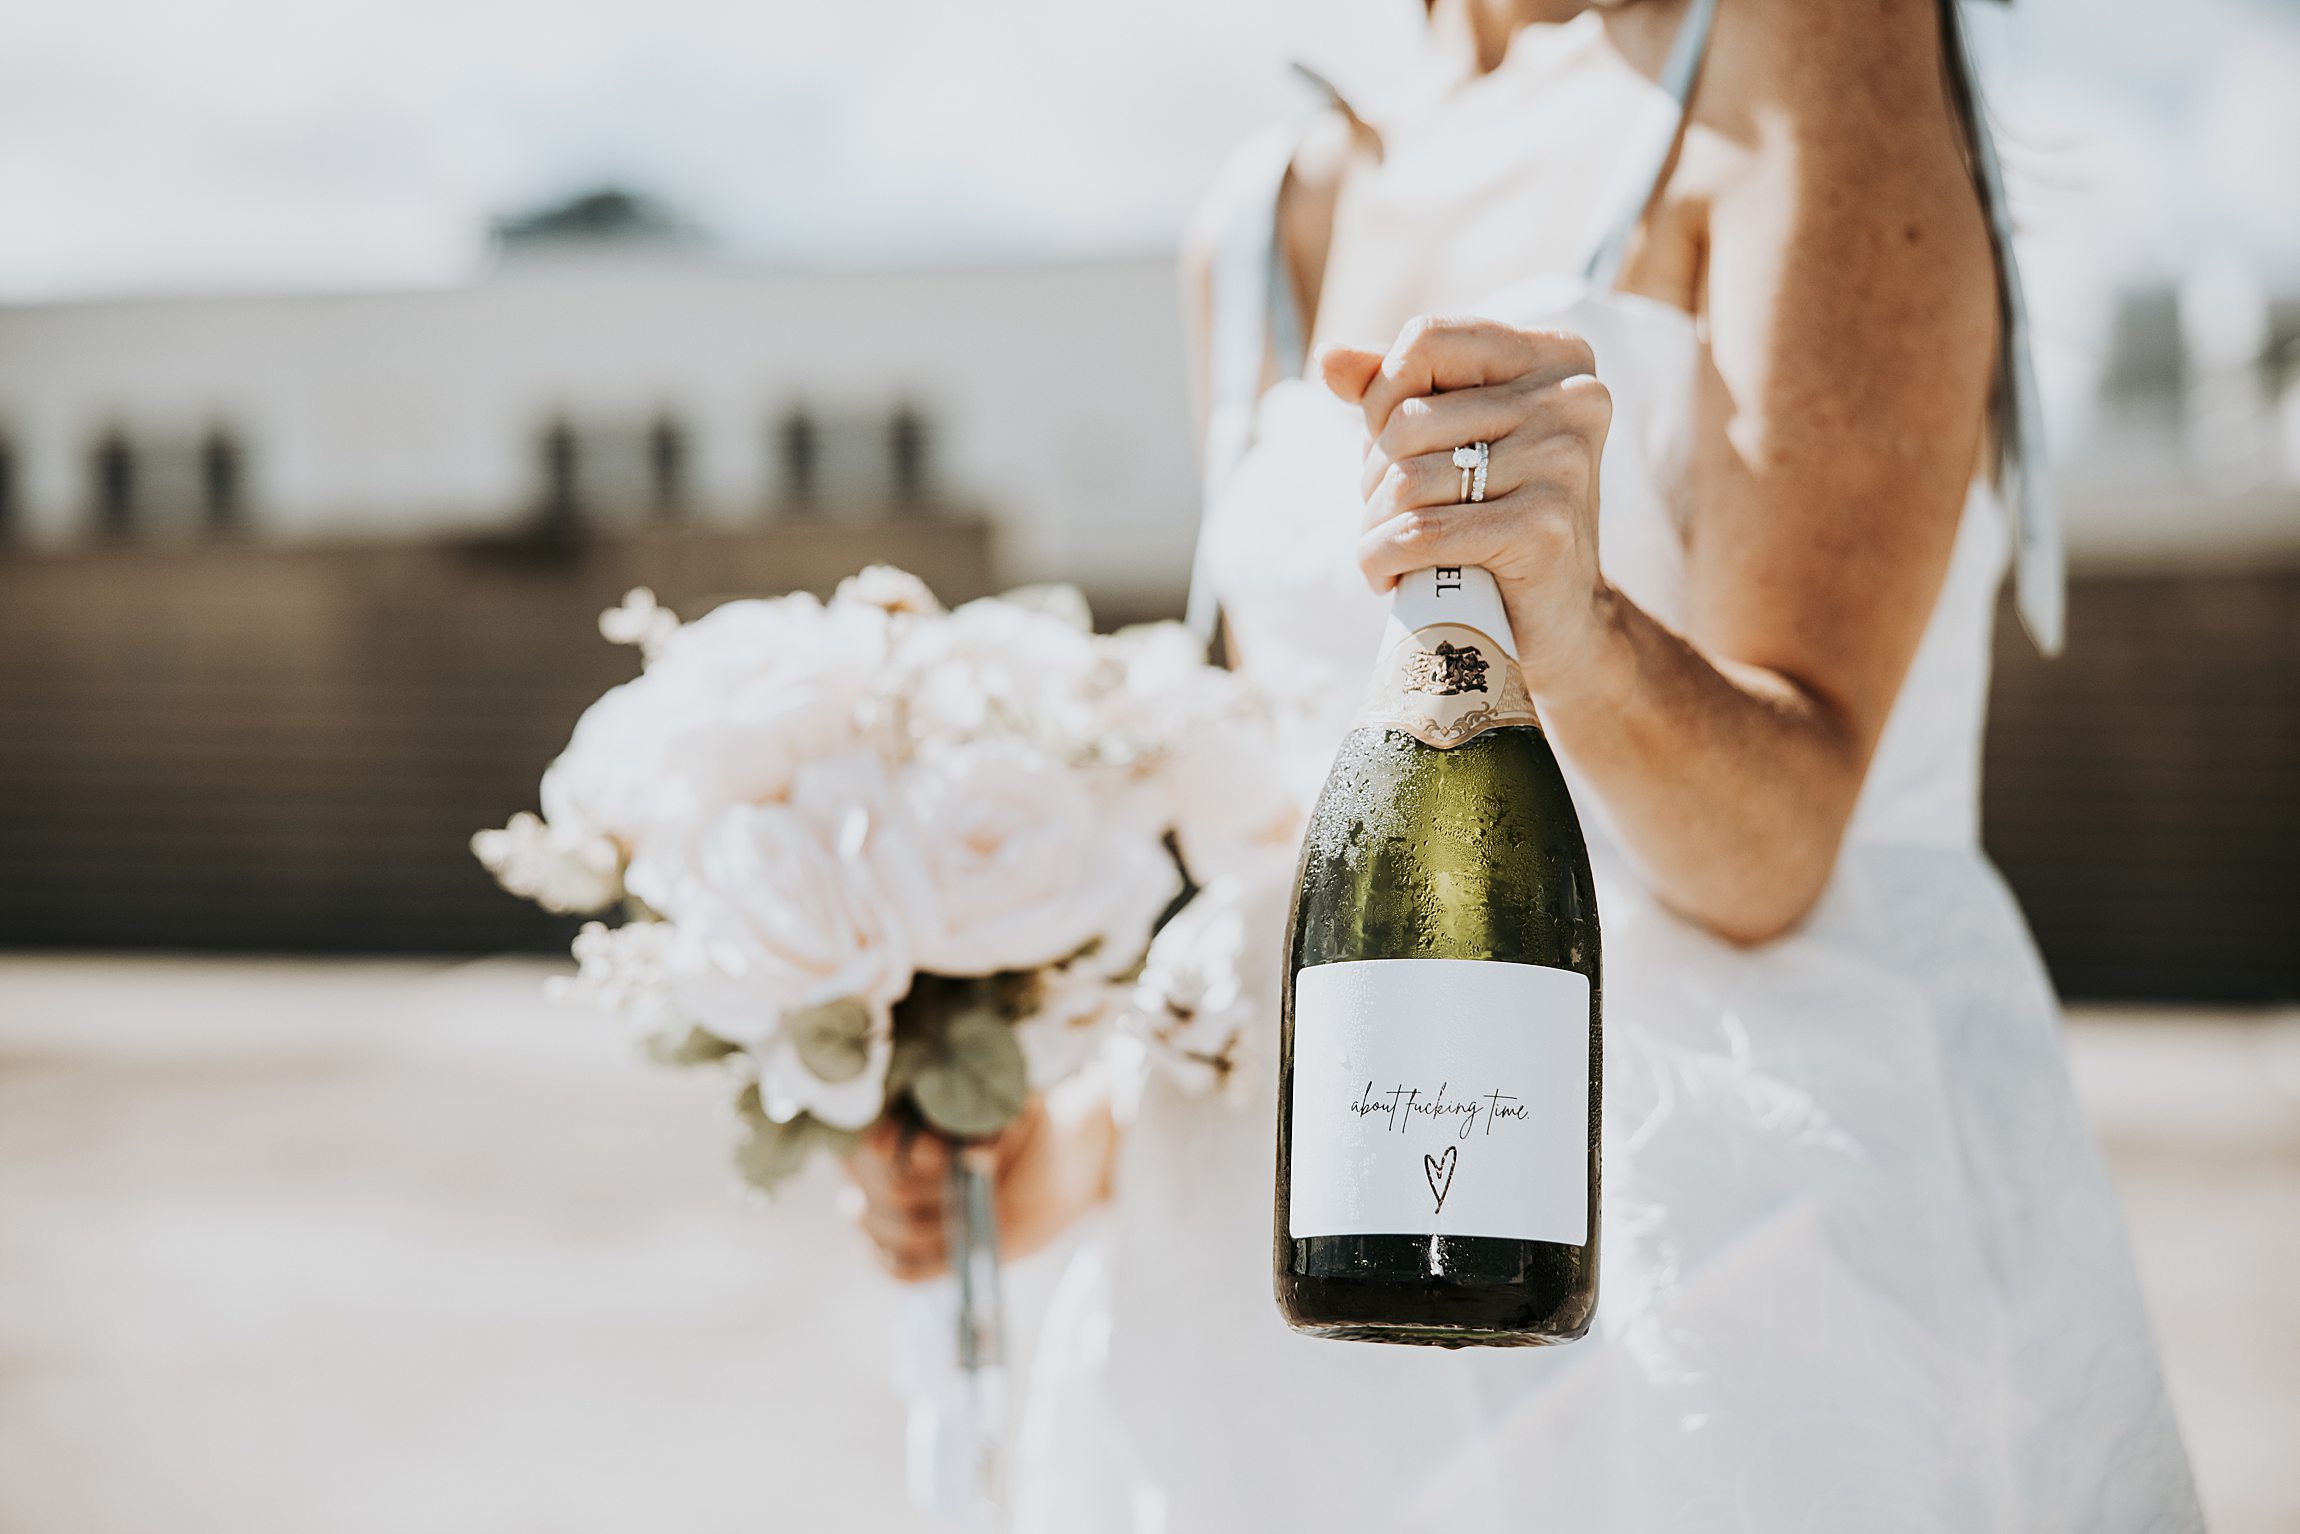 champagne bottle with custom printed label for wedding